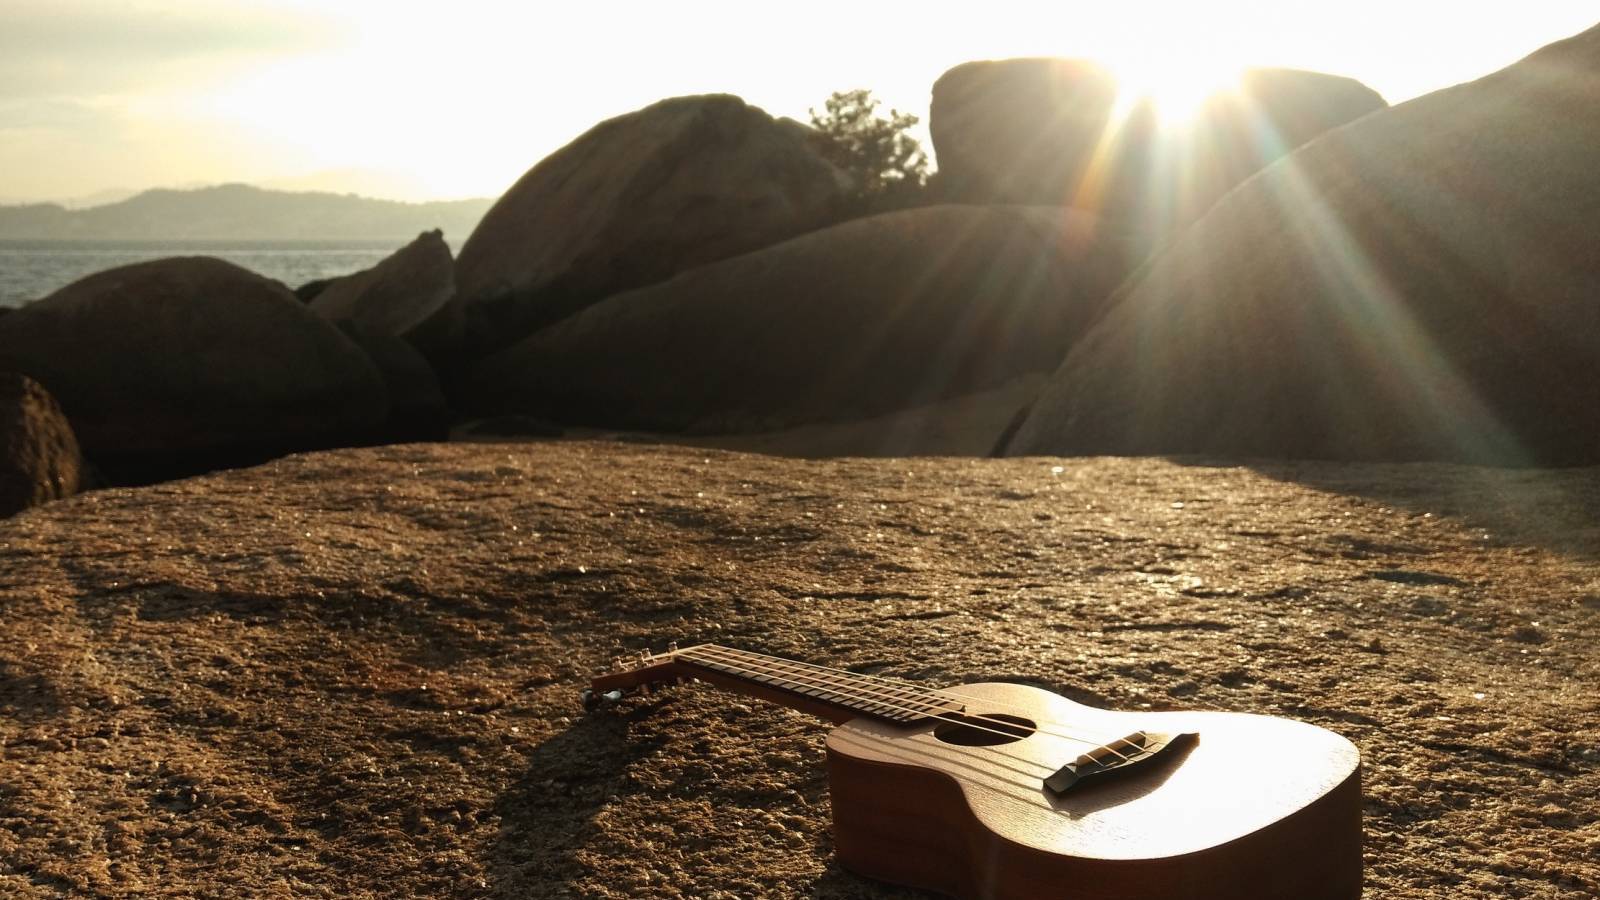 guitar on a rock in the sunshine